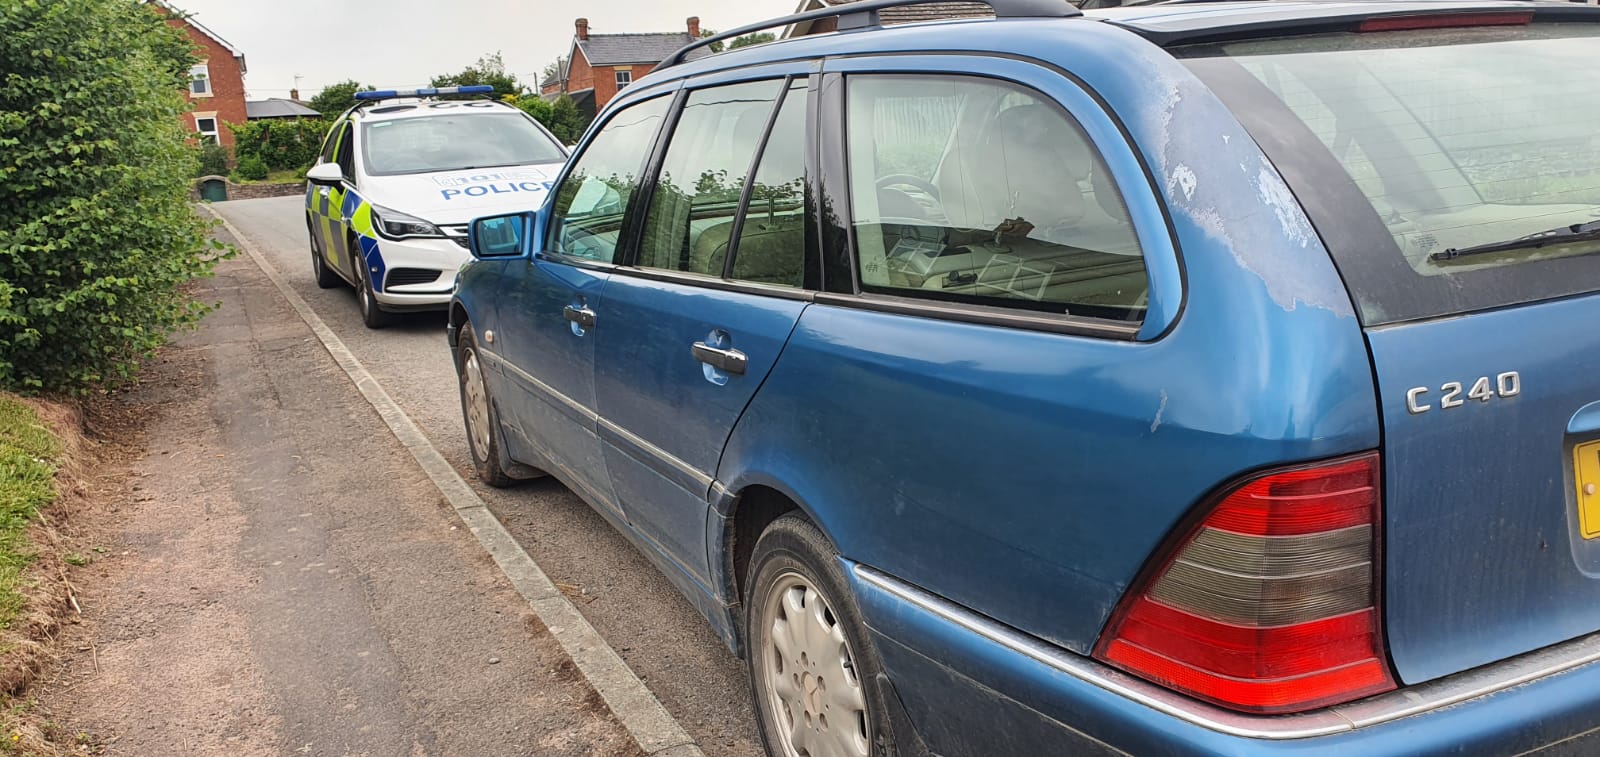 NEWS | Car seized by police officers in Herefordshire